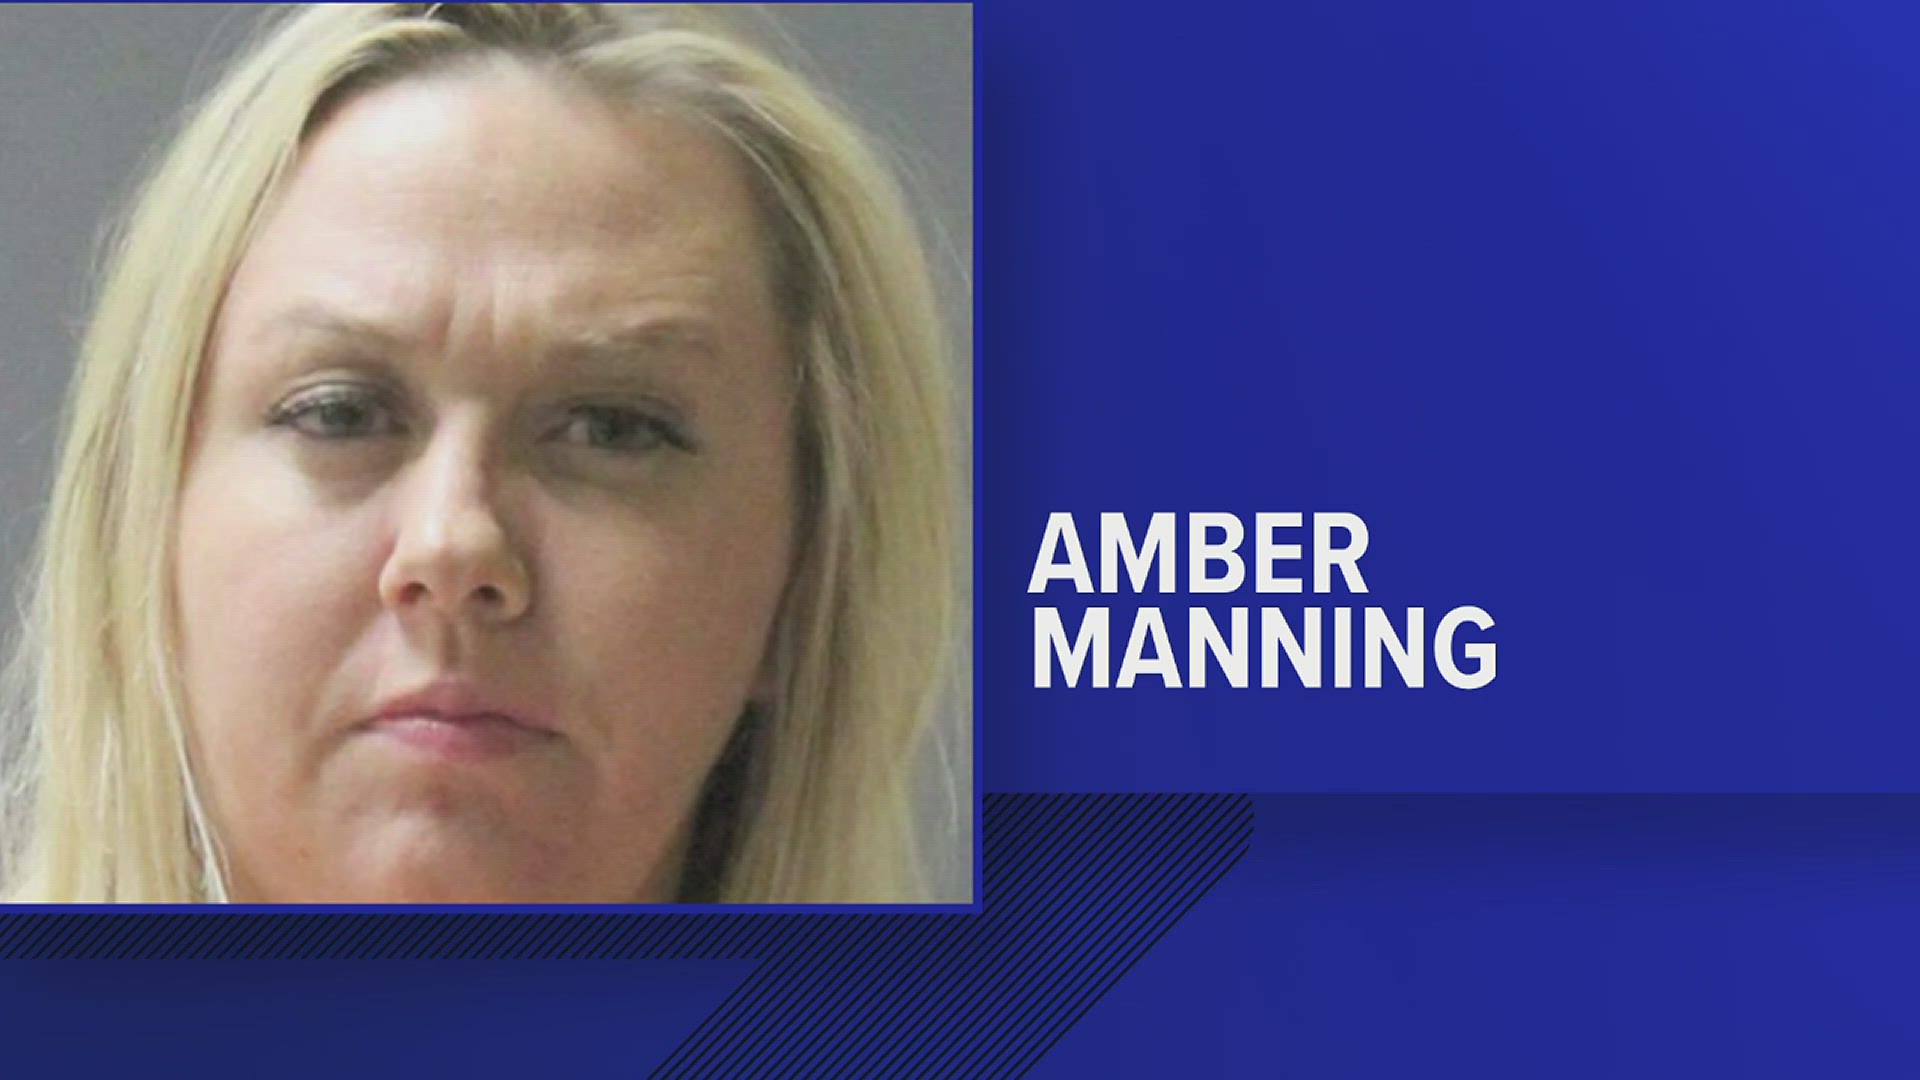 Amber N. Manning, 39, pled guilty to trafficking of children for sexual purposes, pornography involving juveniles and two counts of promoting prostitution.